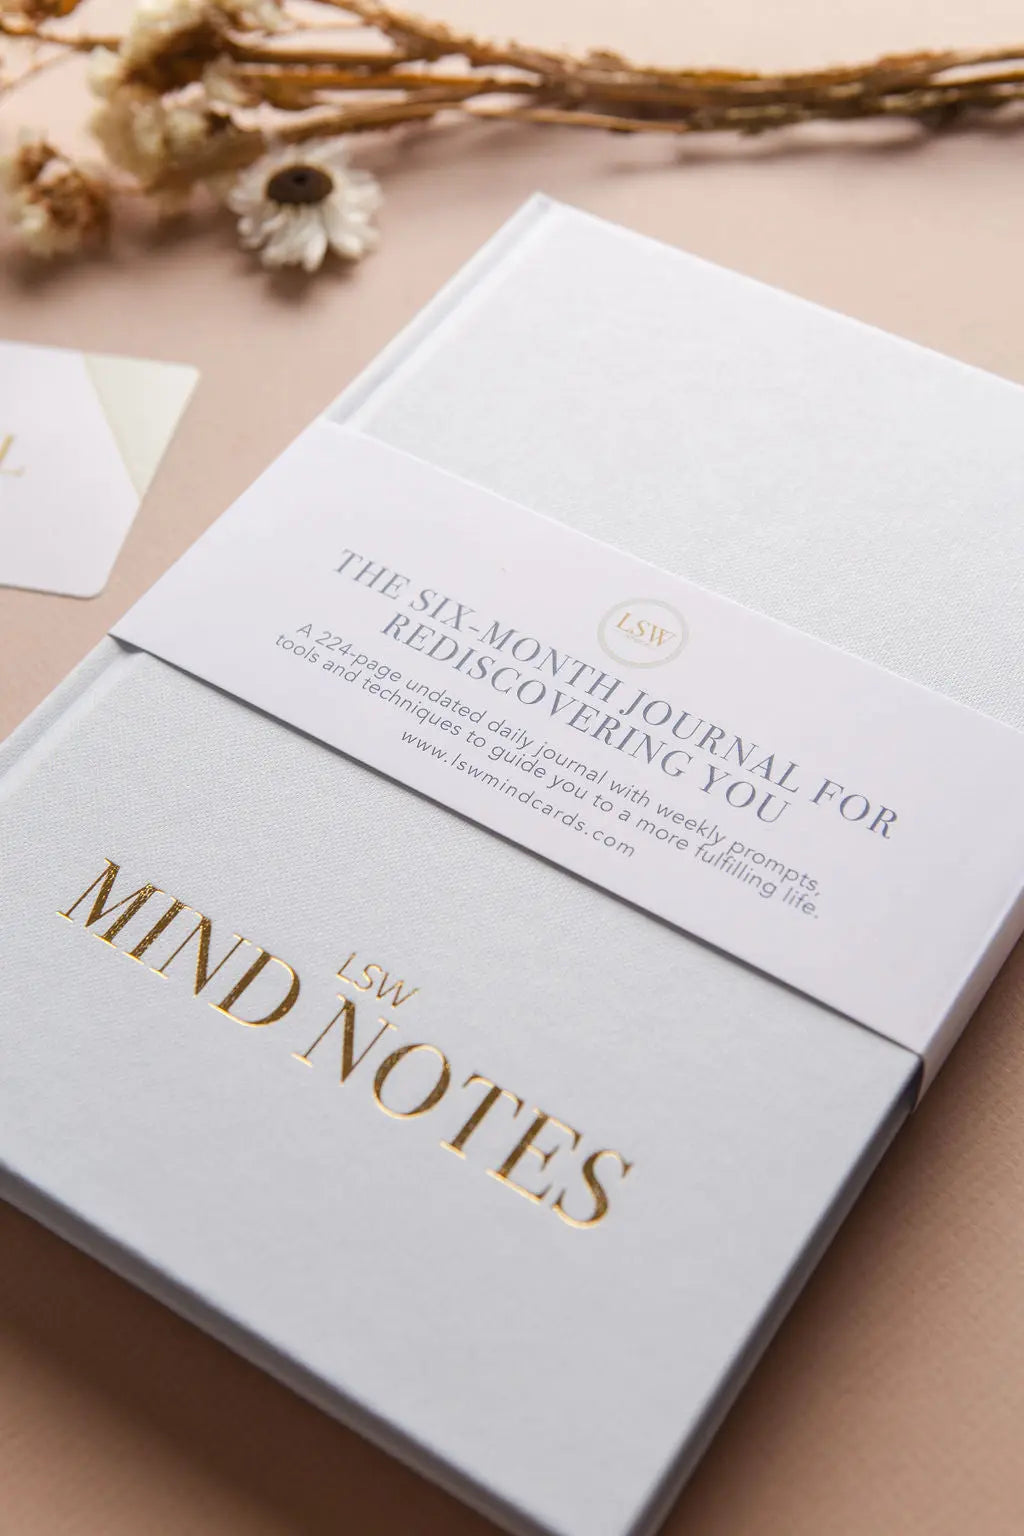 Mind Notes Guided Journal LSW London